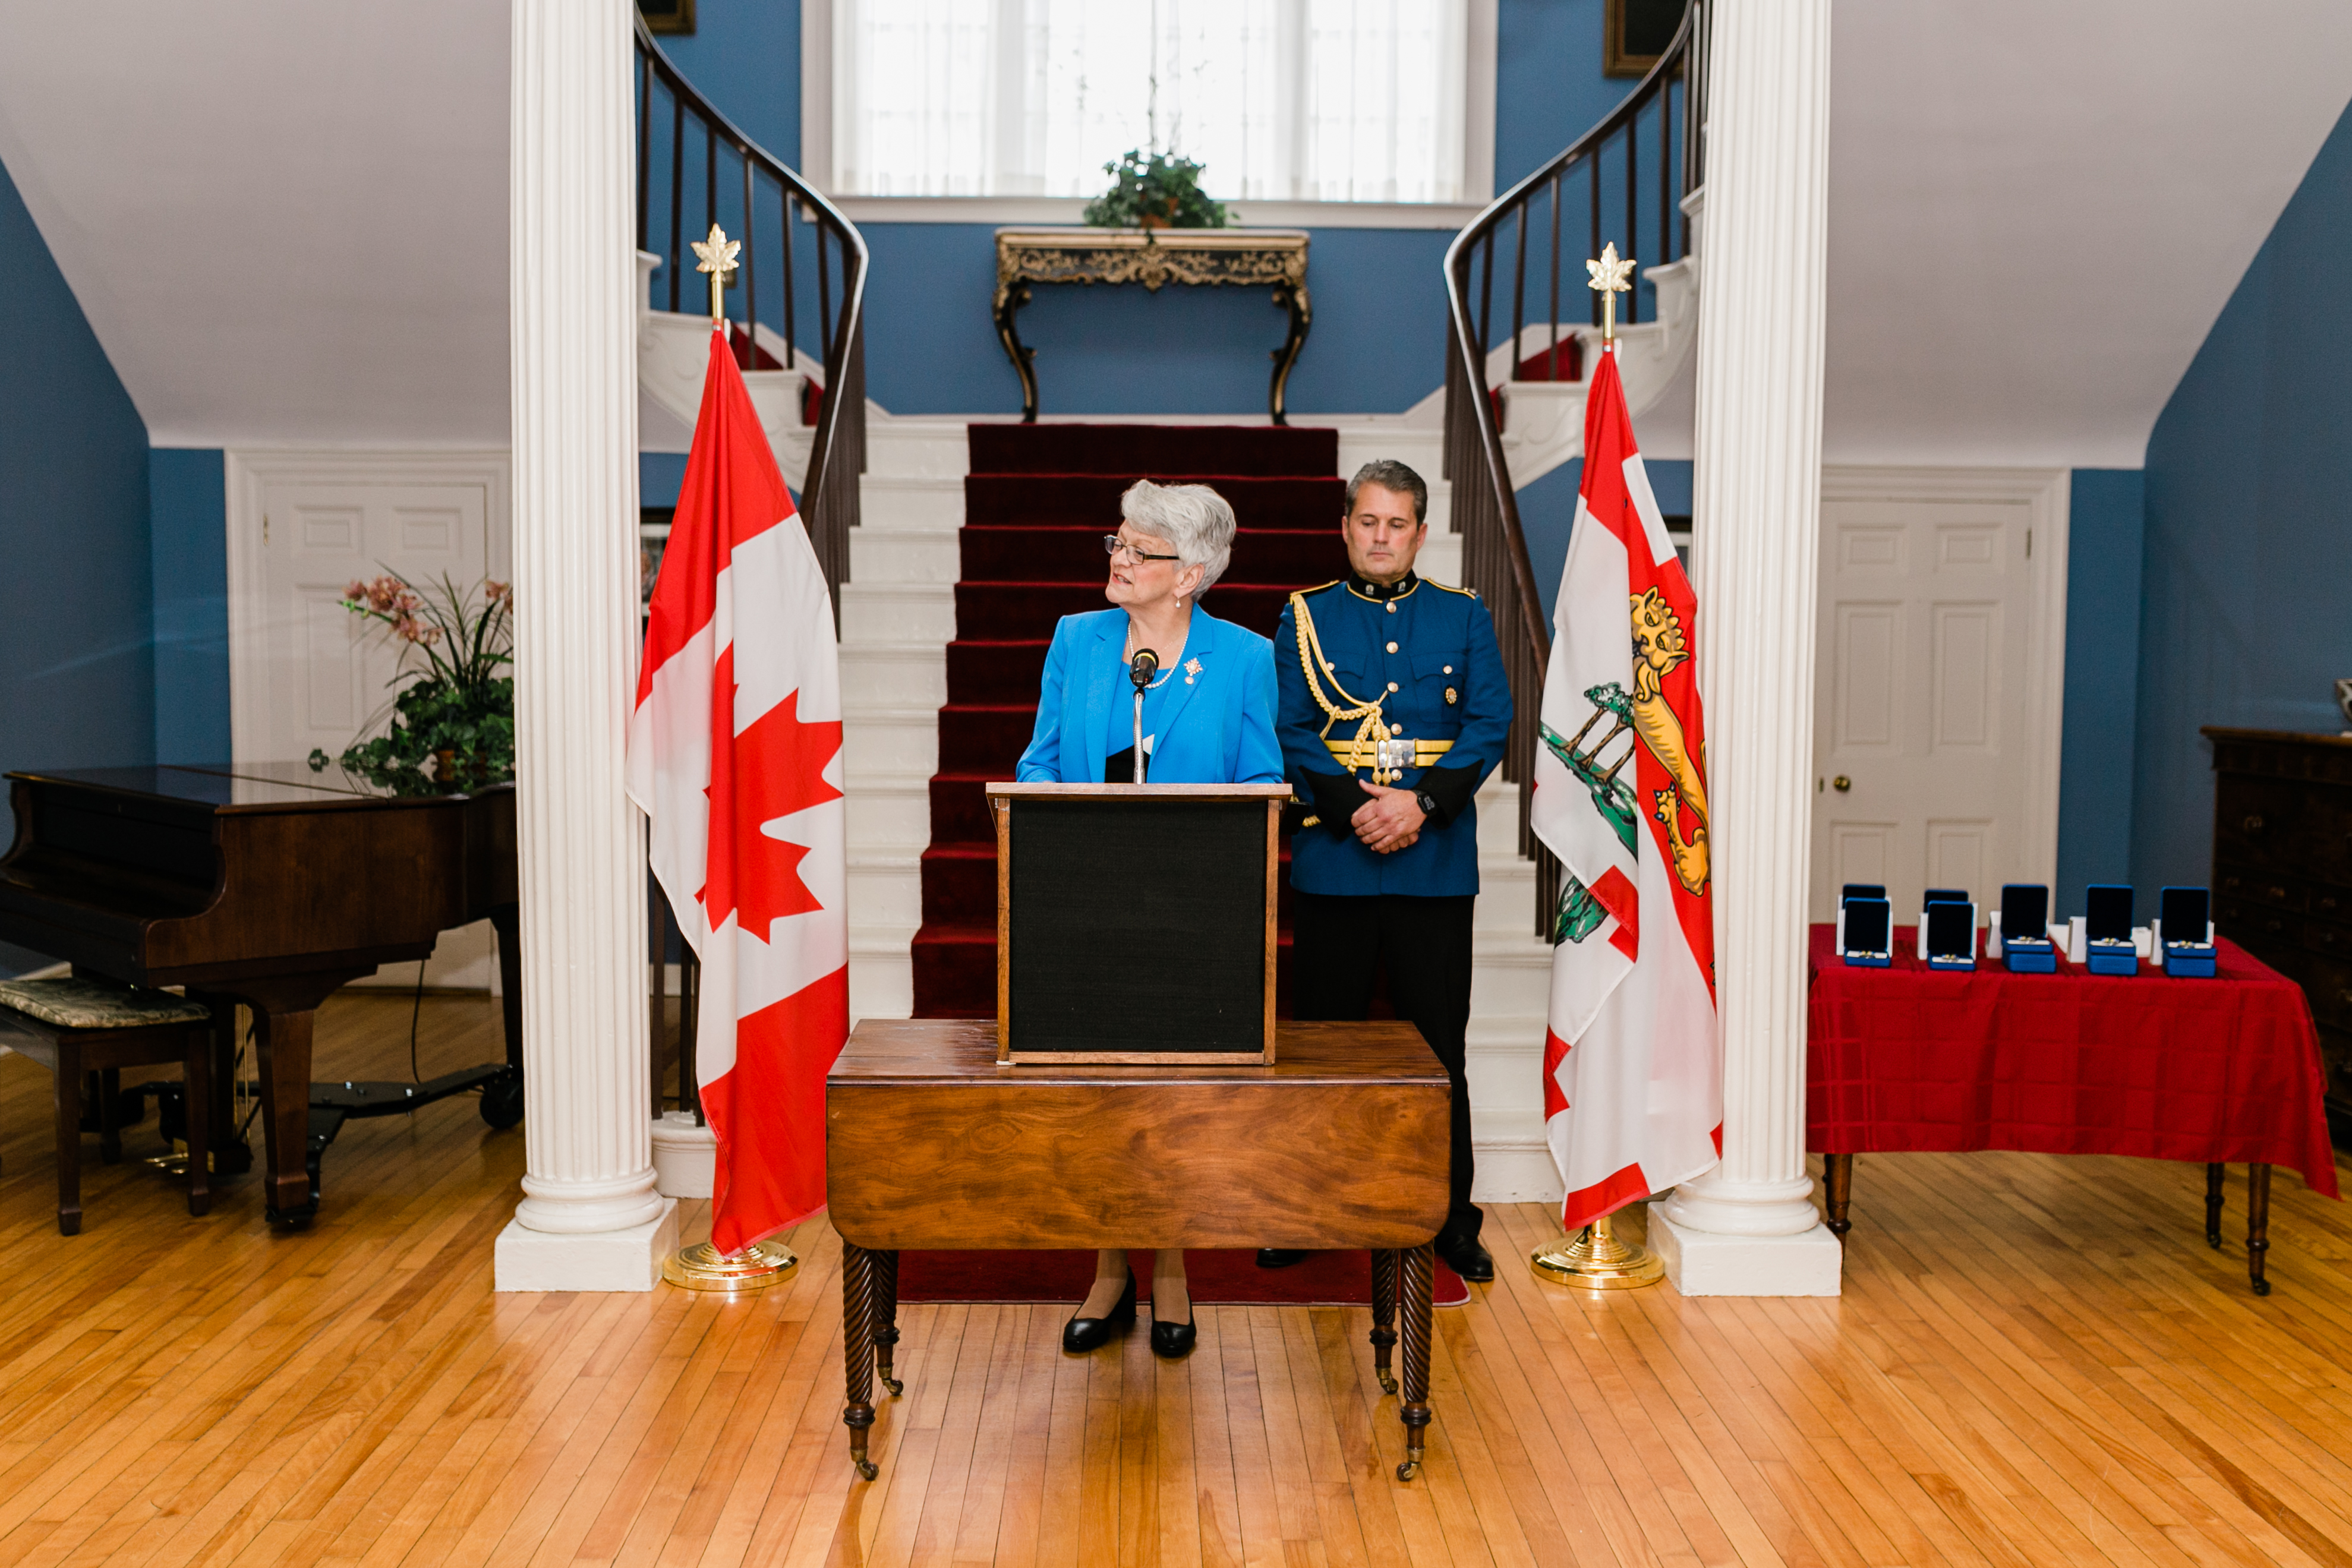 Her Honour speaking at Peace Officers Exemplary Medals